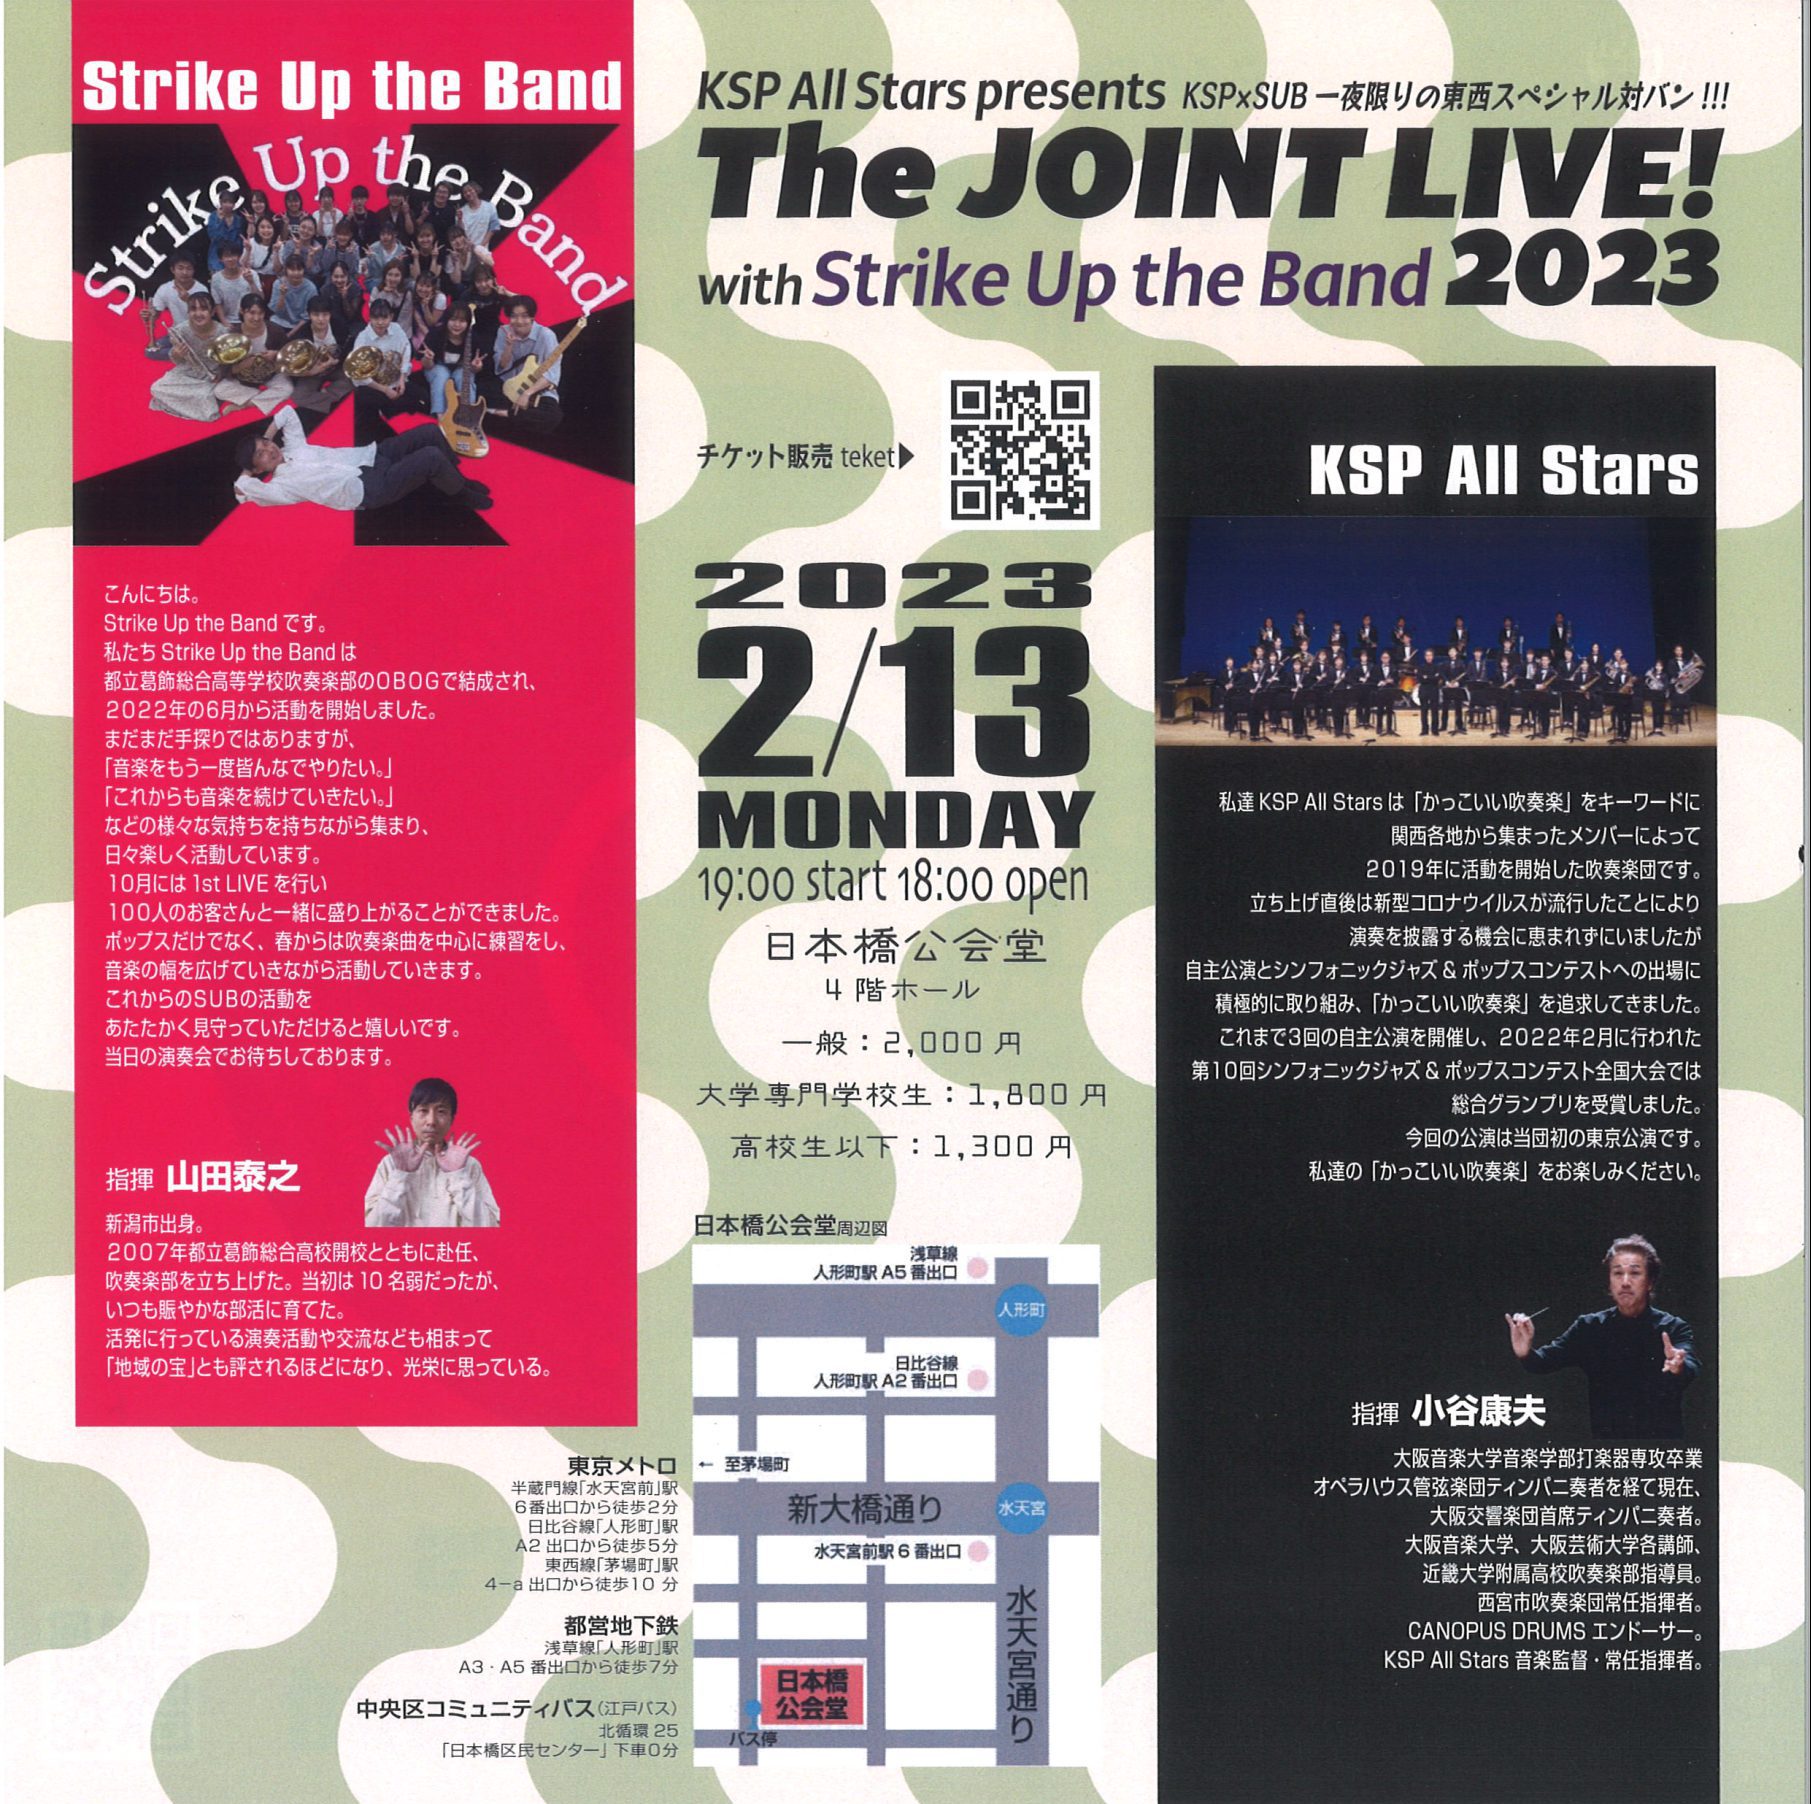 KSP ALL Stars presents The JOINT LIVE！2023 with Strike Up the Band